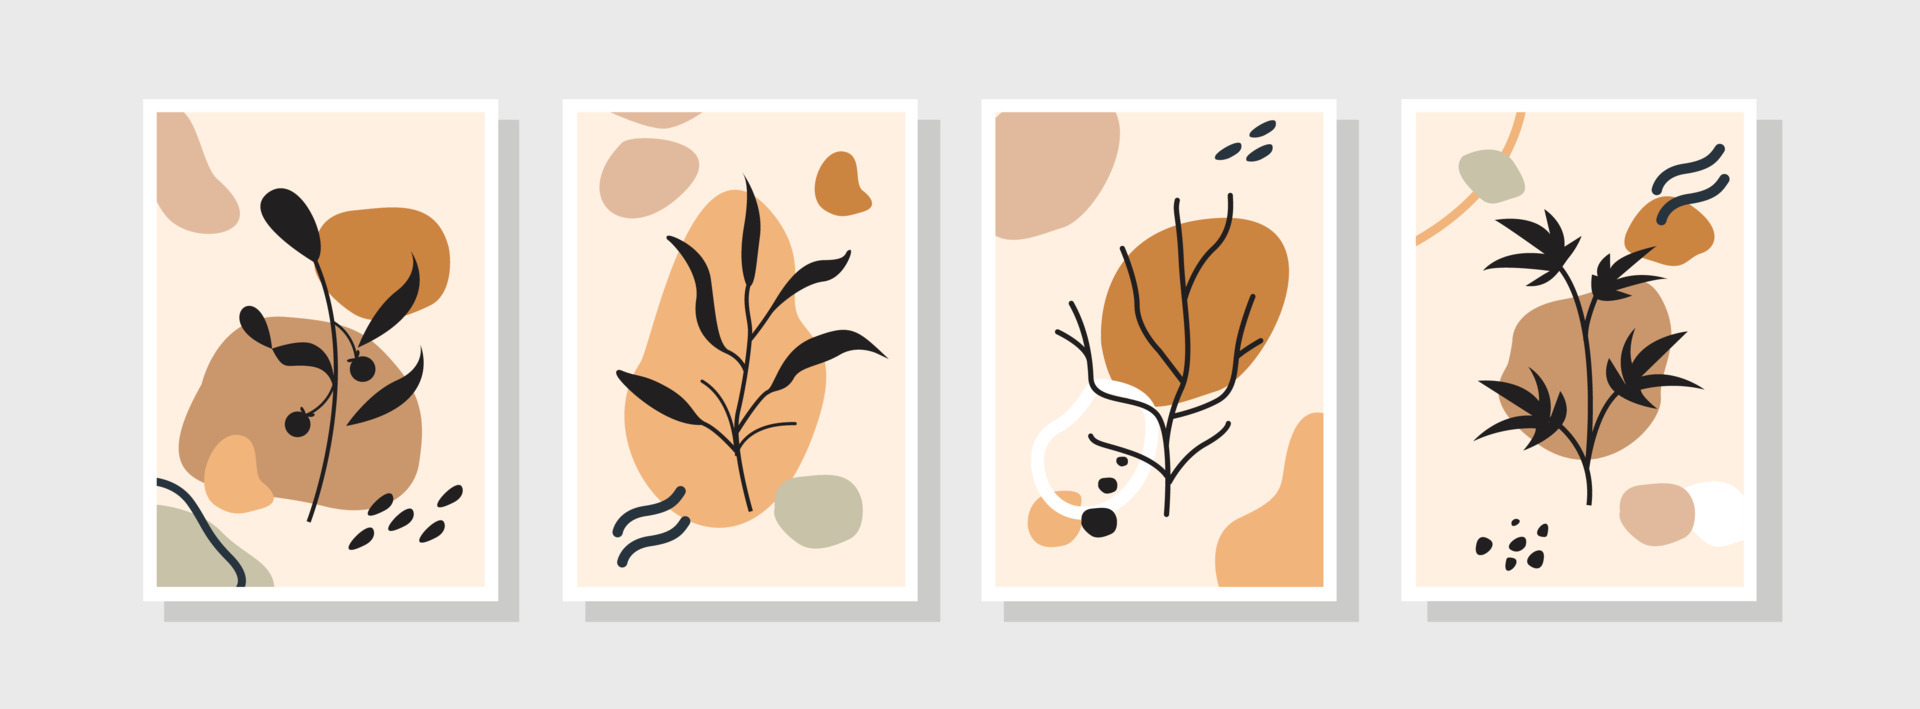 Abstract Plant Art design for print, cover, wallpaper, minimal wall art ...